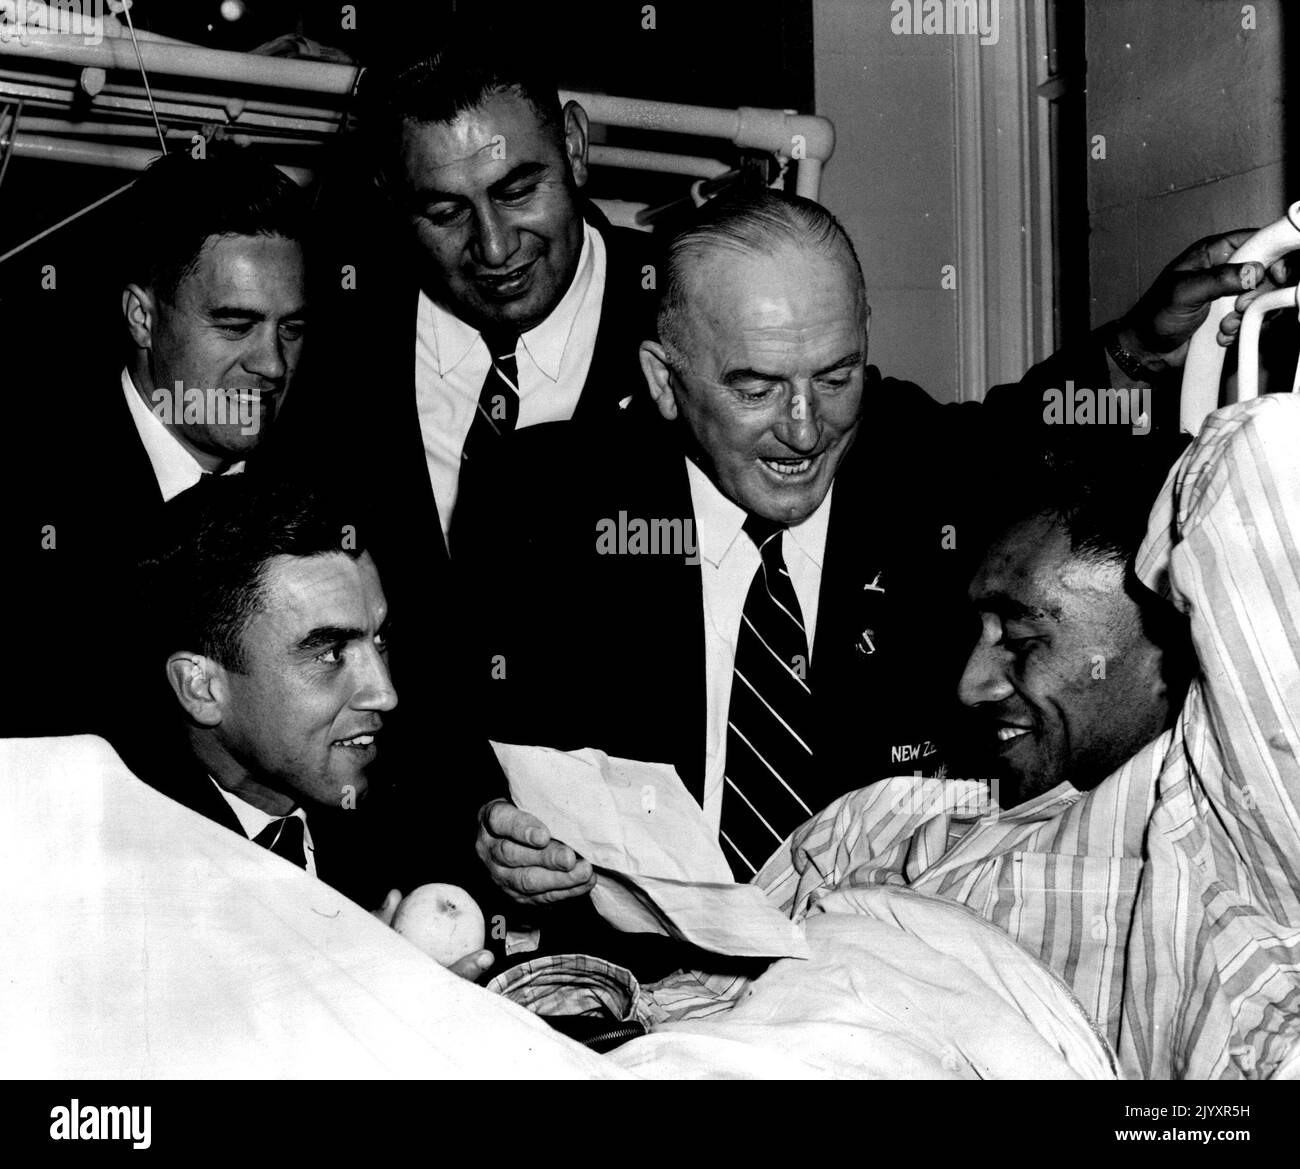 The New Zealand Prime Minister, Mr. W. Nash, yesterday sent a cable to Maori Rugby Union centre Bill Gray, who broke a leg in Saturday's match against Sounth Harbour. The cable wished Gray a speedy recovery. Team manager Mr. Frank Kilby and teammates R. Keepa, P. Walsh and R. Byers (sitting) took the message to Gray in hospital. June 3, 1953. (Photo by Australian Photographic Agency). Stock Photo